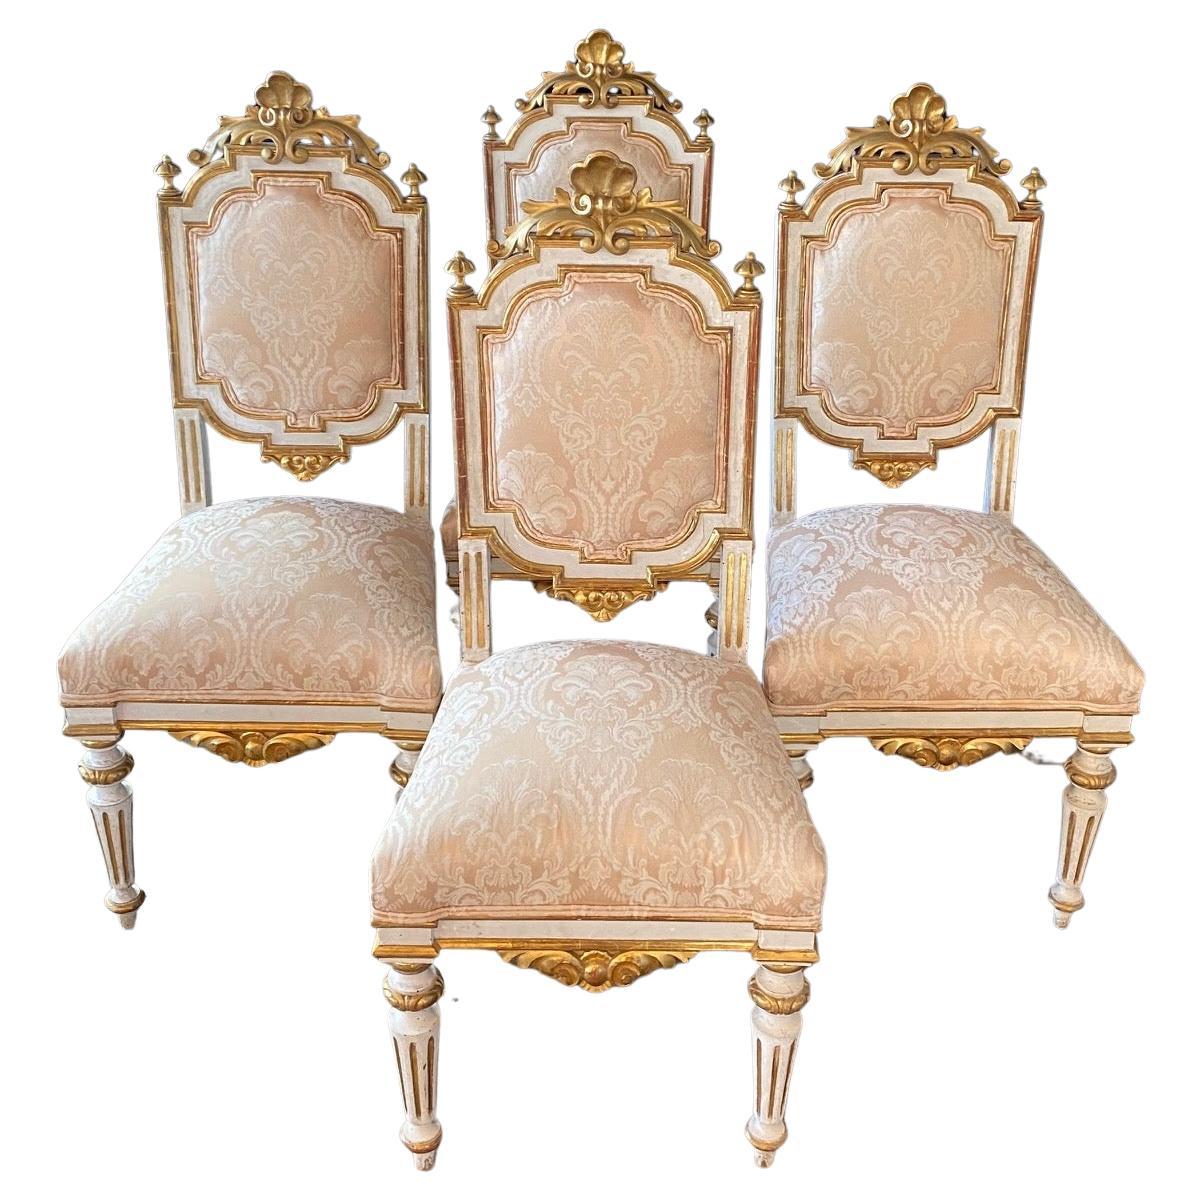 Fancy Set of Four Italian Venetian Louis XV Chairs with Original Real Gold Gilt